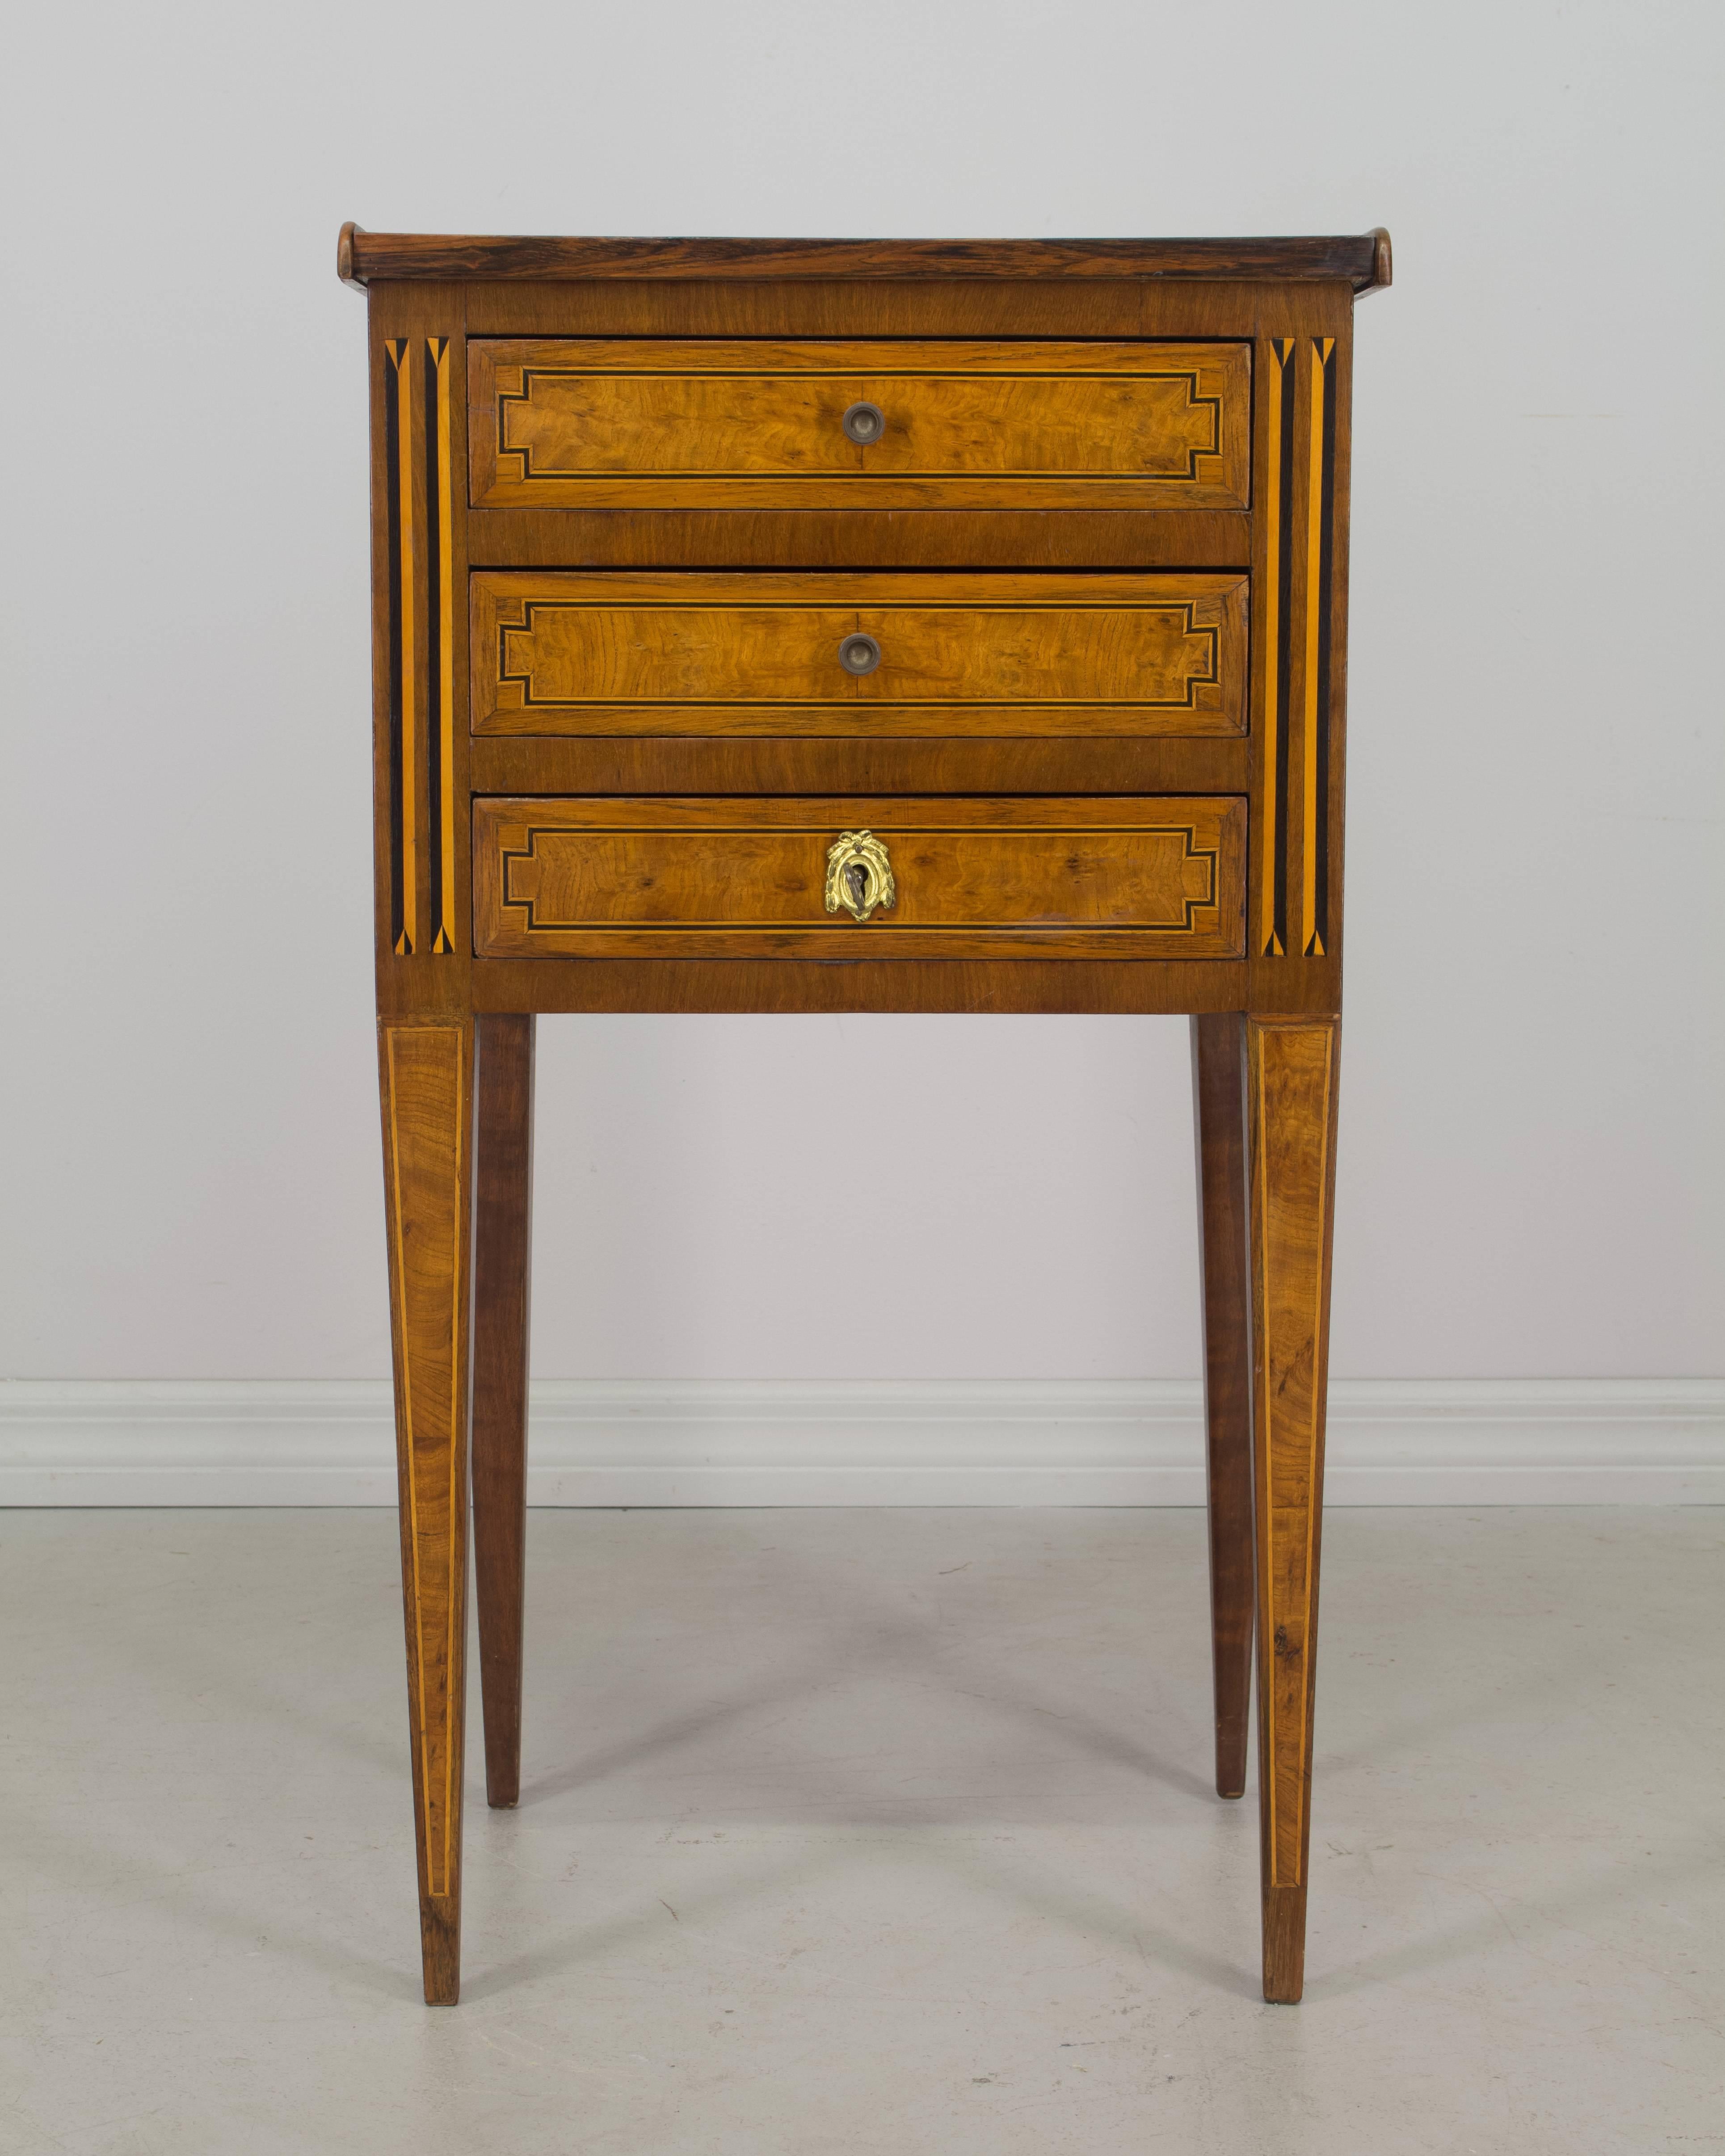 Louis XVI style marquetry side table inlaid with various veneers including burled walnut, mahogany and maple. Three dovetailed drawers with working lock and key. French polish finish. Oak as a secondary wood.